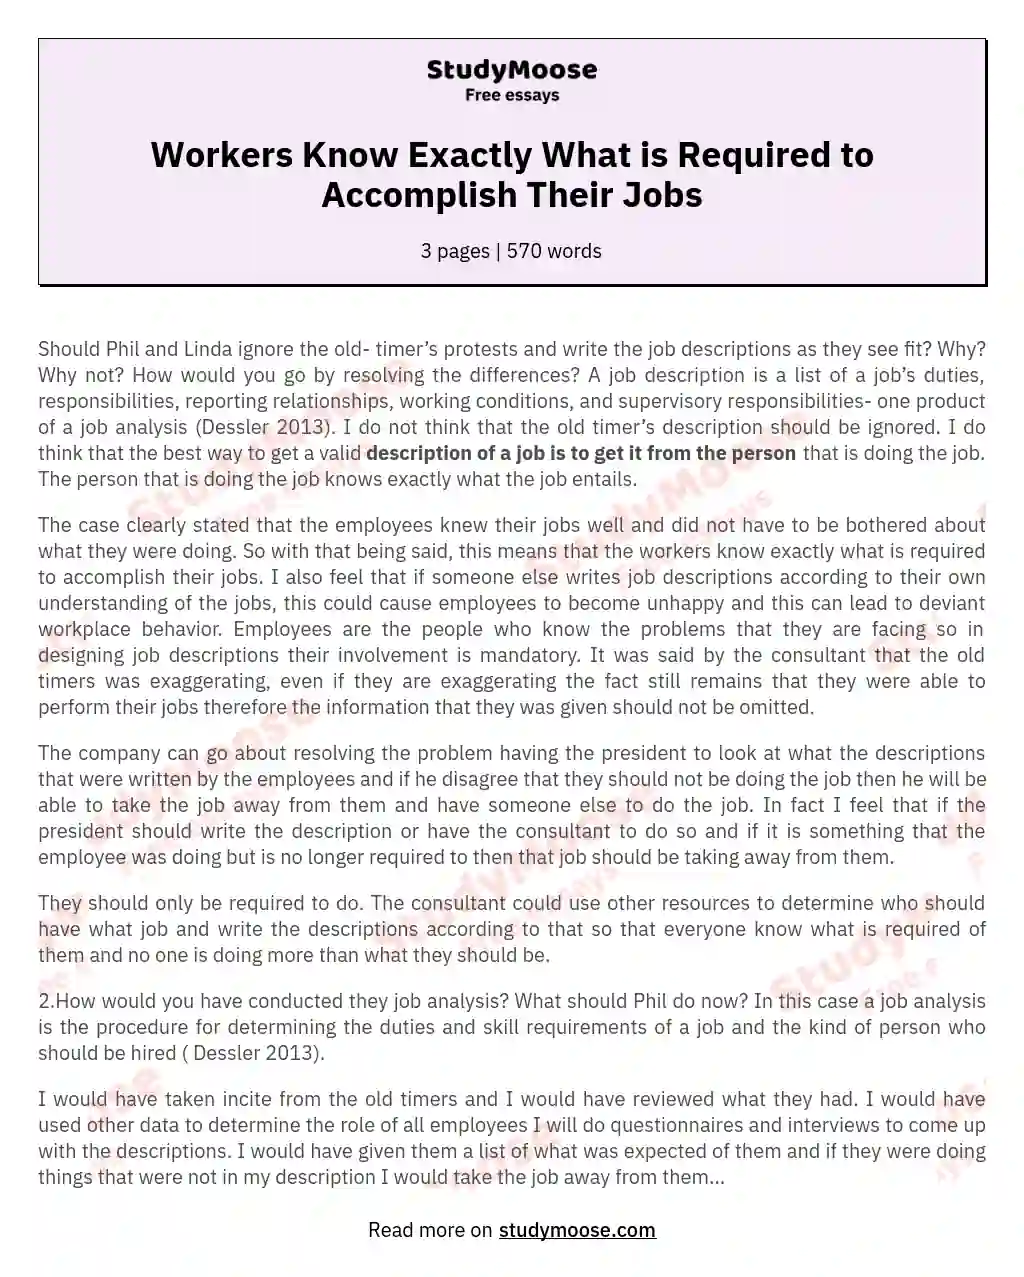 Workers Know Exactly What is Required to Accomplish Their Jobs essay